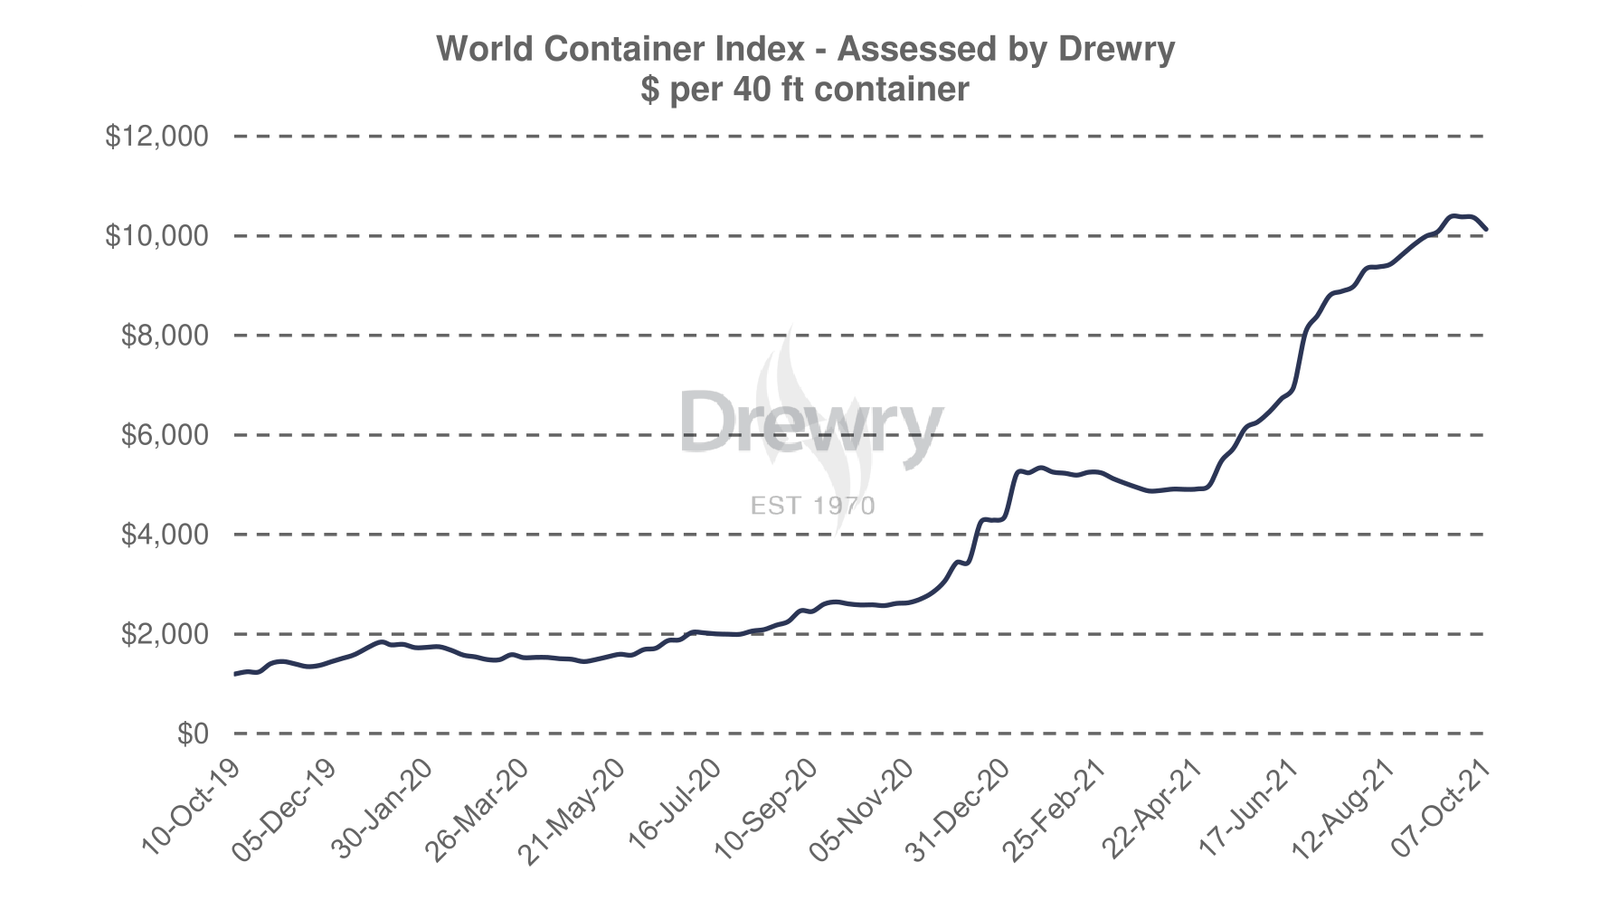 World container index (Source: Drewry)